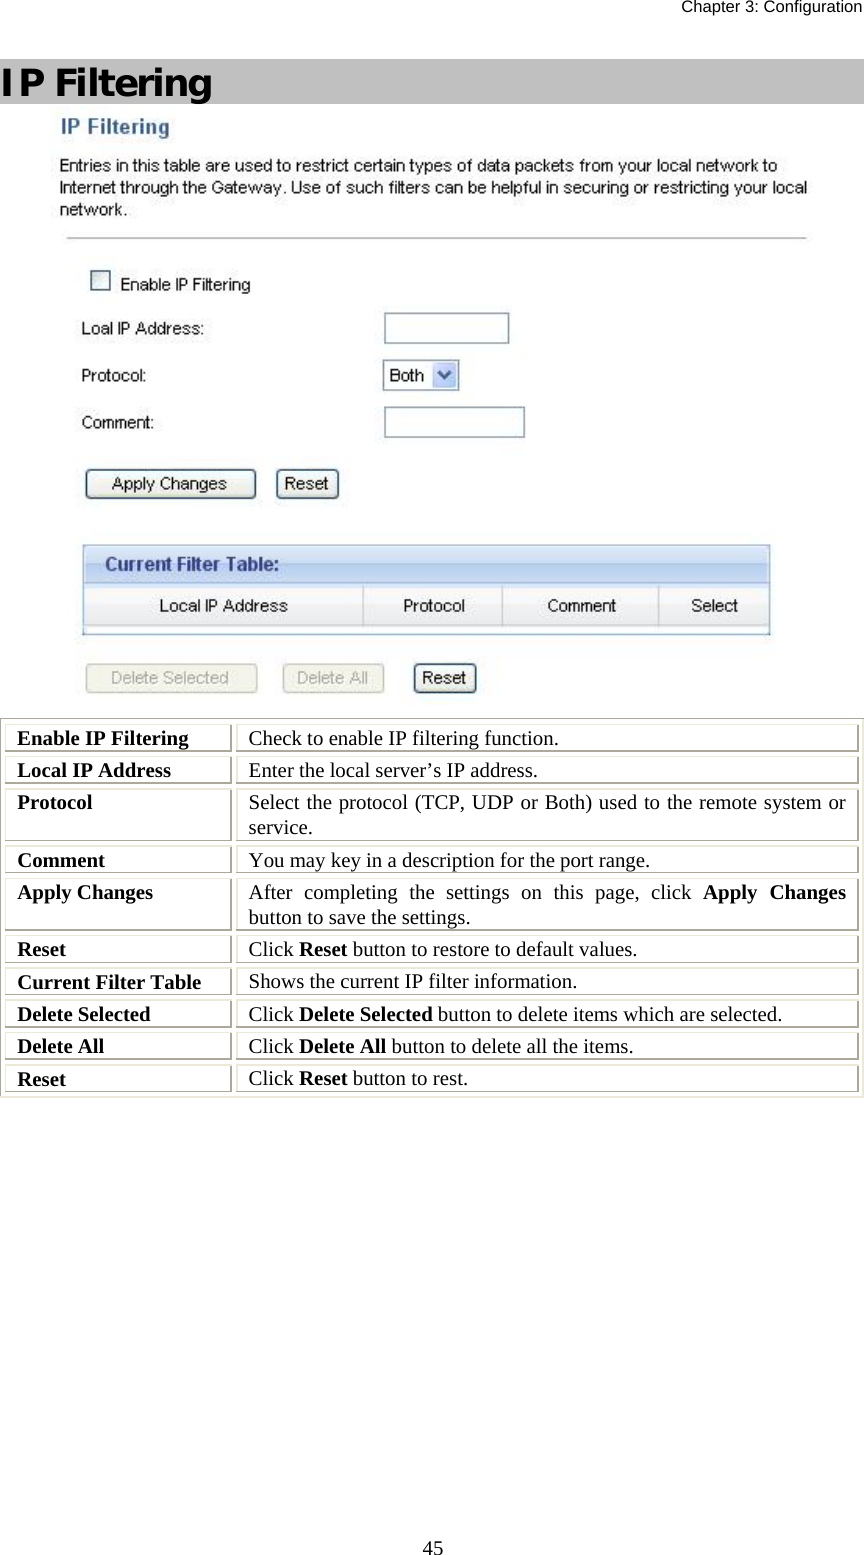   Chapter 3: Configuration  45IP Filtering  Enable IP Filtering  Check to enable IP filtering function. Local IP Address  Enter the local server’s IP address. Protocol  Select the protocol (TCP, UDP or Both) used to the remote system or service. Comment  You may key in a description for the port range. Apply Changes  After completing the settings on this page, click Apply Changes button to save the settings. Reset  Click Reset button to restore to default values. Current Filter Table  Shows the current IP filter information. Delete Selected  Click Delete Selected button to delete items which are selected. Delete All  Click Delete All button to delete all the items. Reset  Click Reset button to rest.  